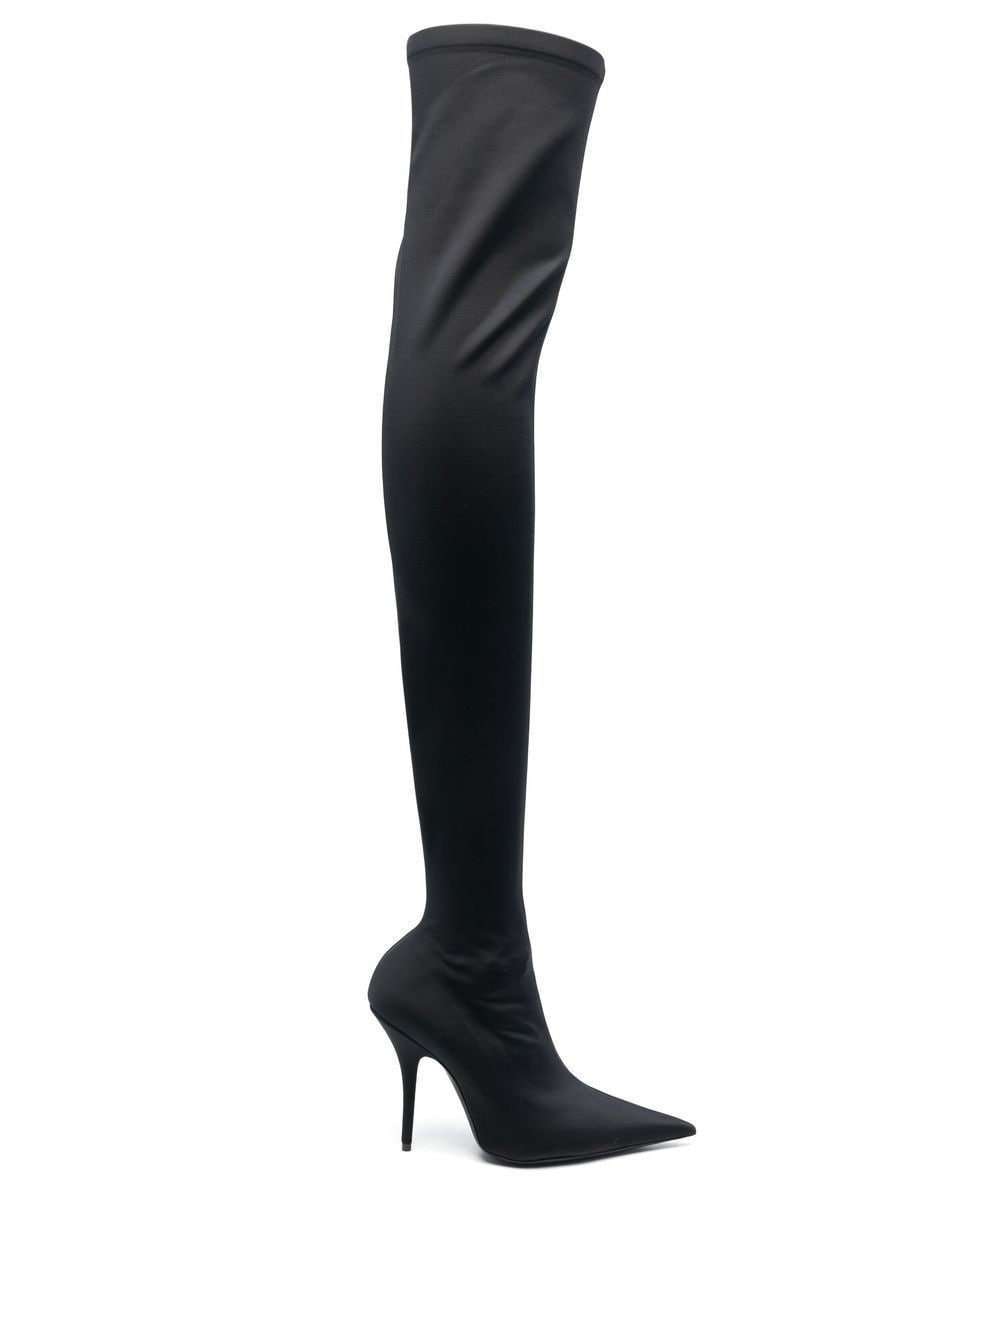 Balenciaga Luxury Black Leather Pointed Toe Boots For Women